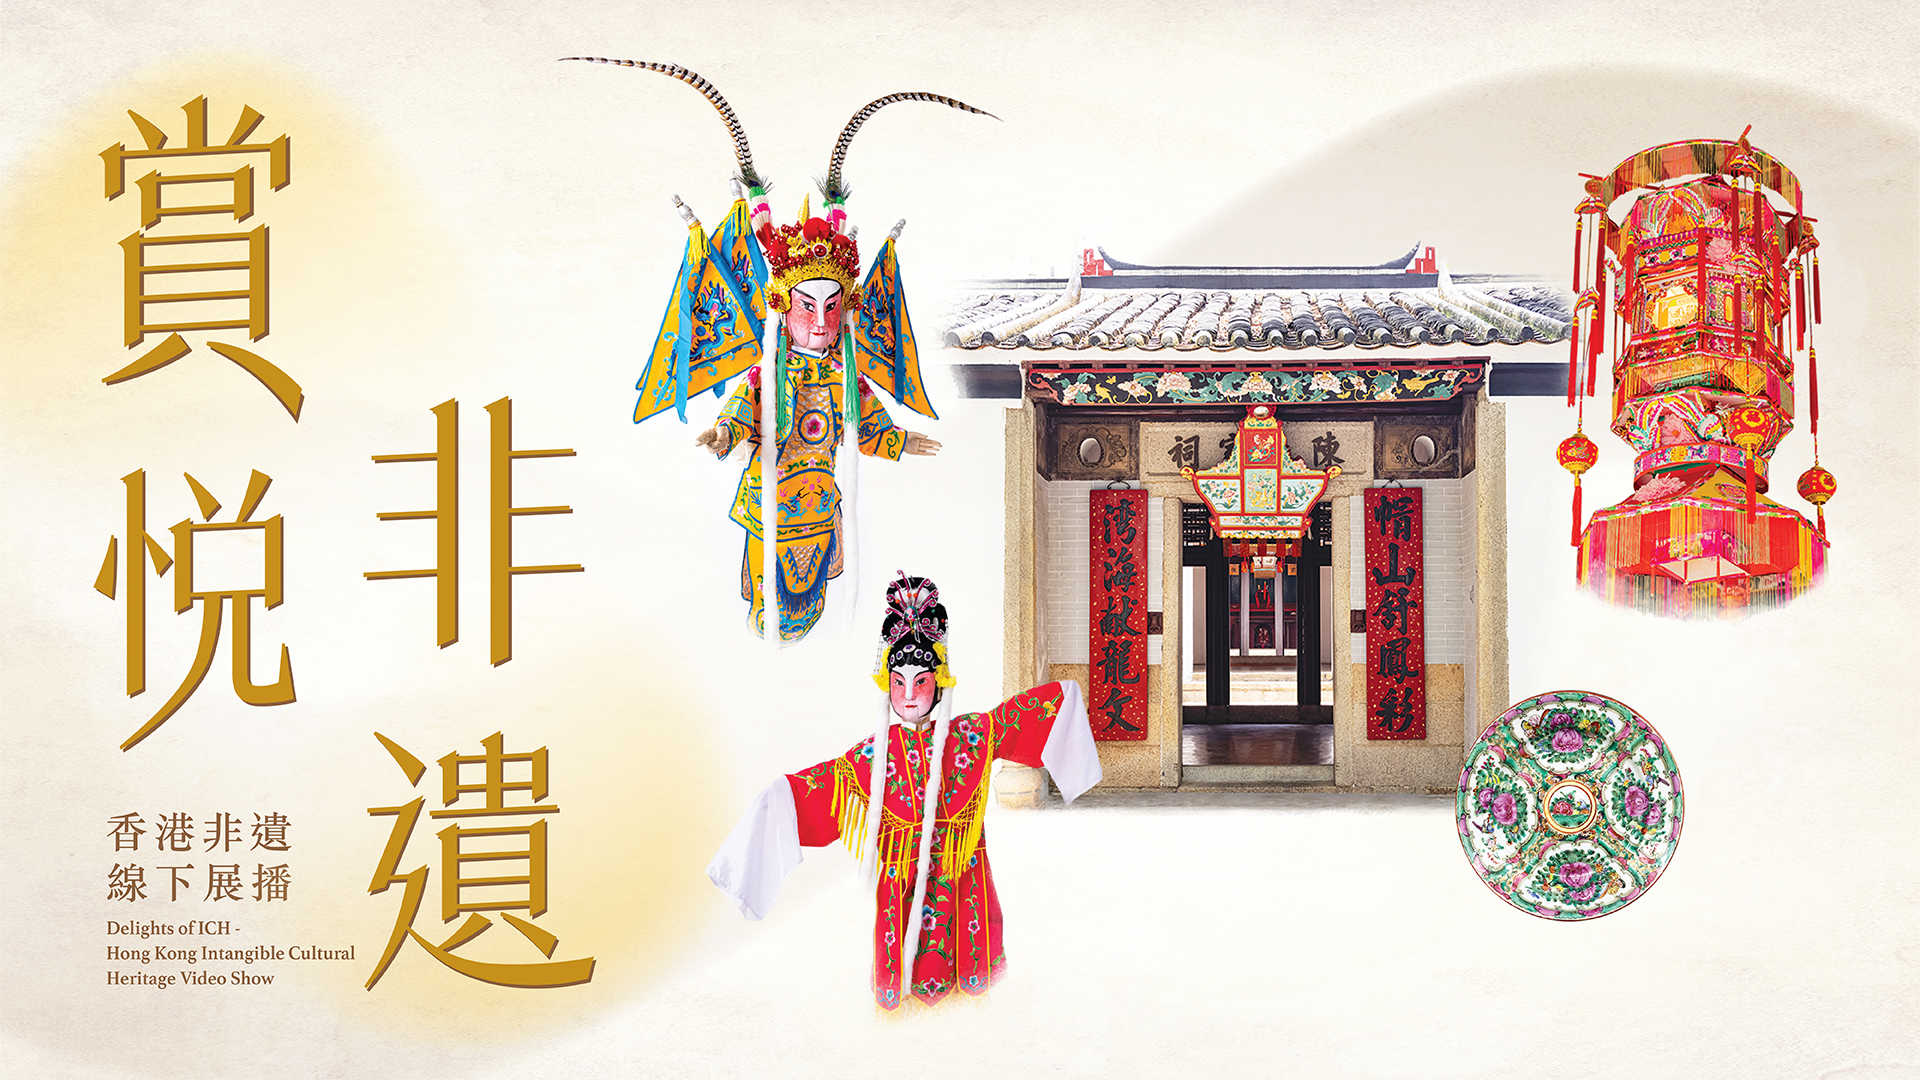 Delights of ICH - Hong Kong Intangible Cultural Heritage Video Show